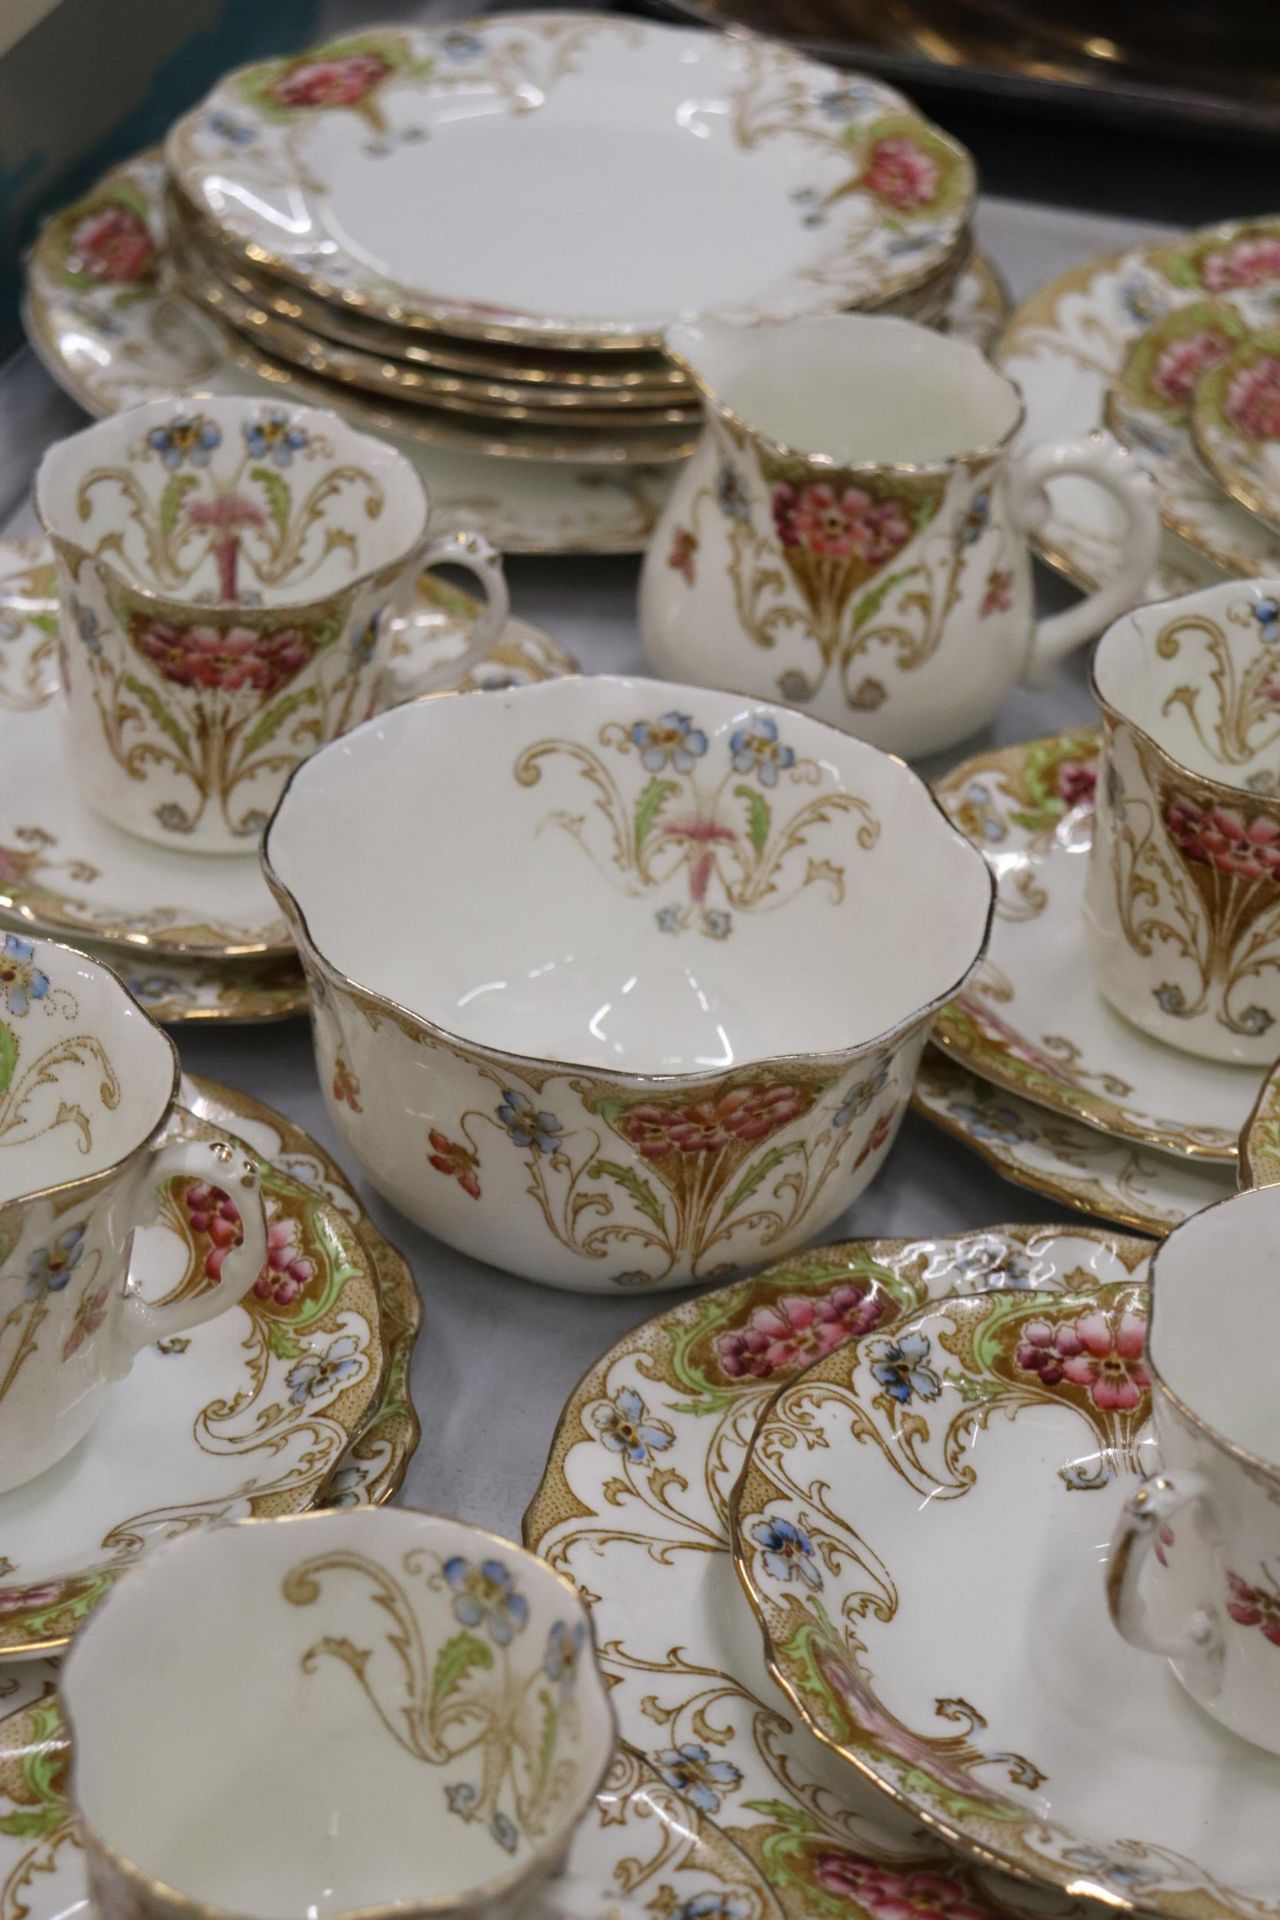 A LATE 18TH/EARLY 19TH CENTURY TEASET BY FRED B PEARCE & CO, LONDON, TO INCLUDE CAKE PLATES, A CREAM - Image 8 of 10